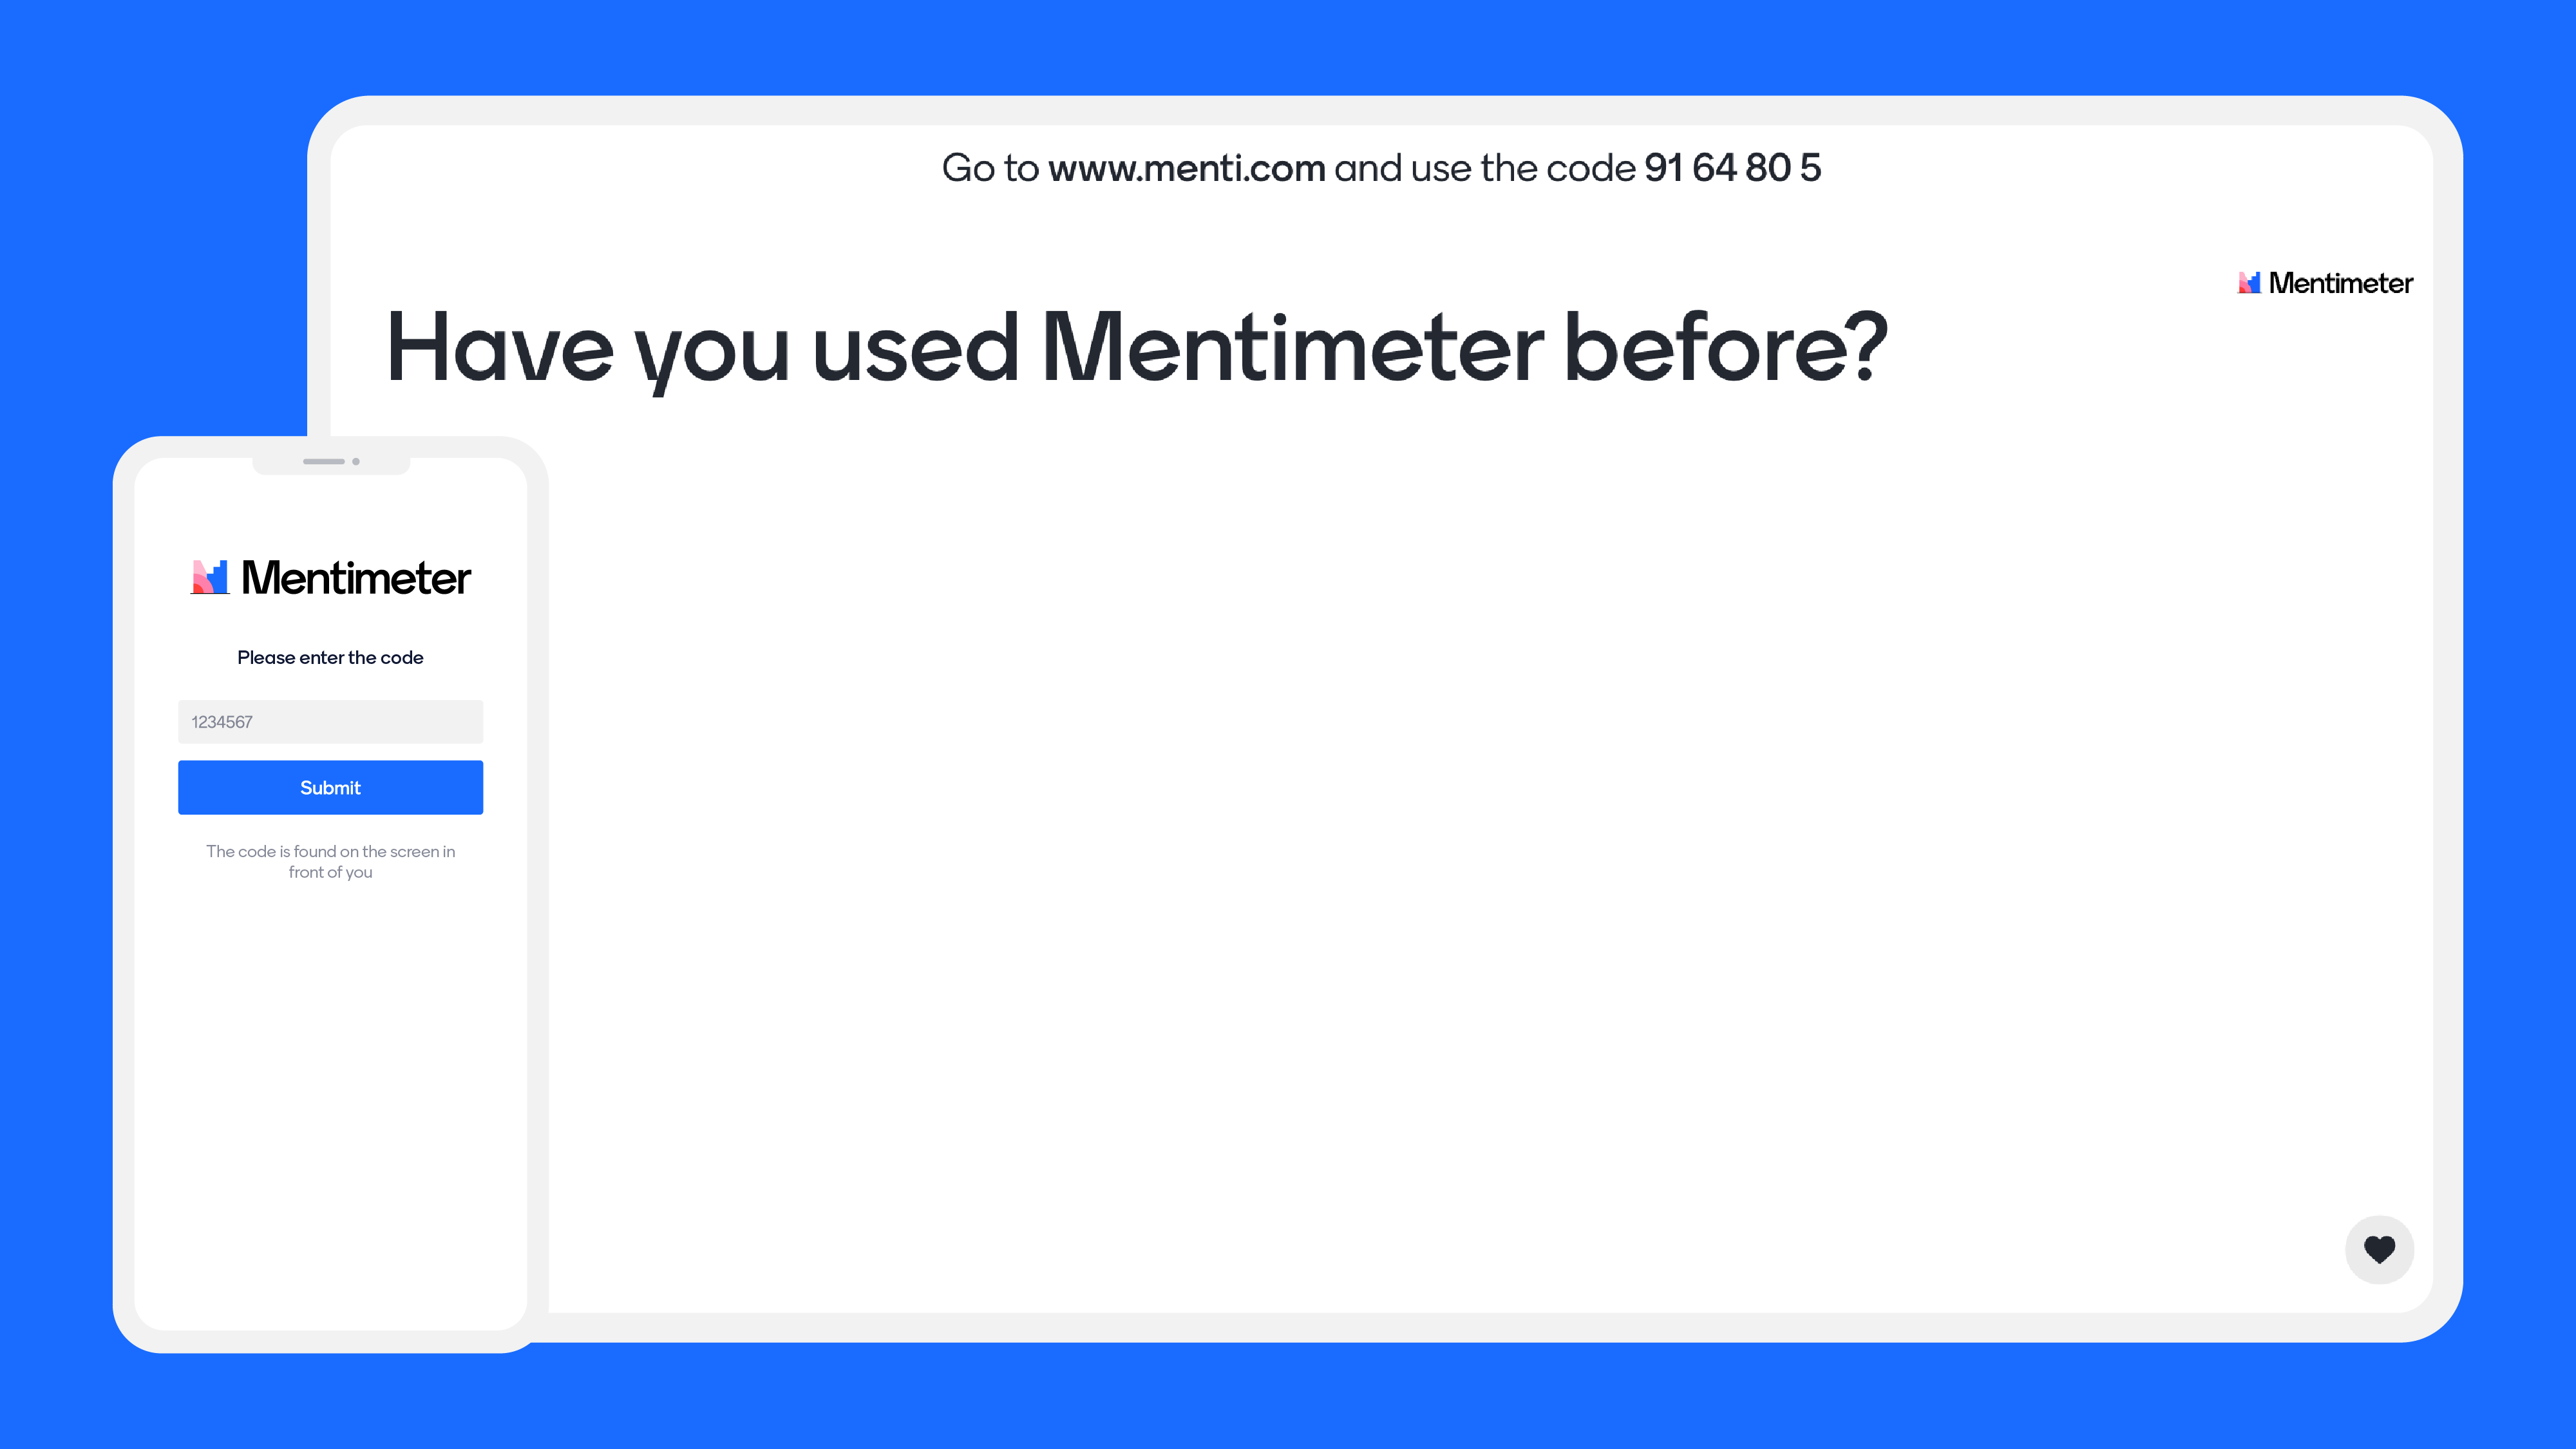 Have you used Mentimeter before?